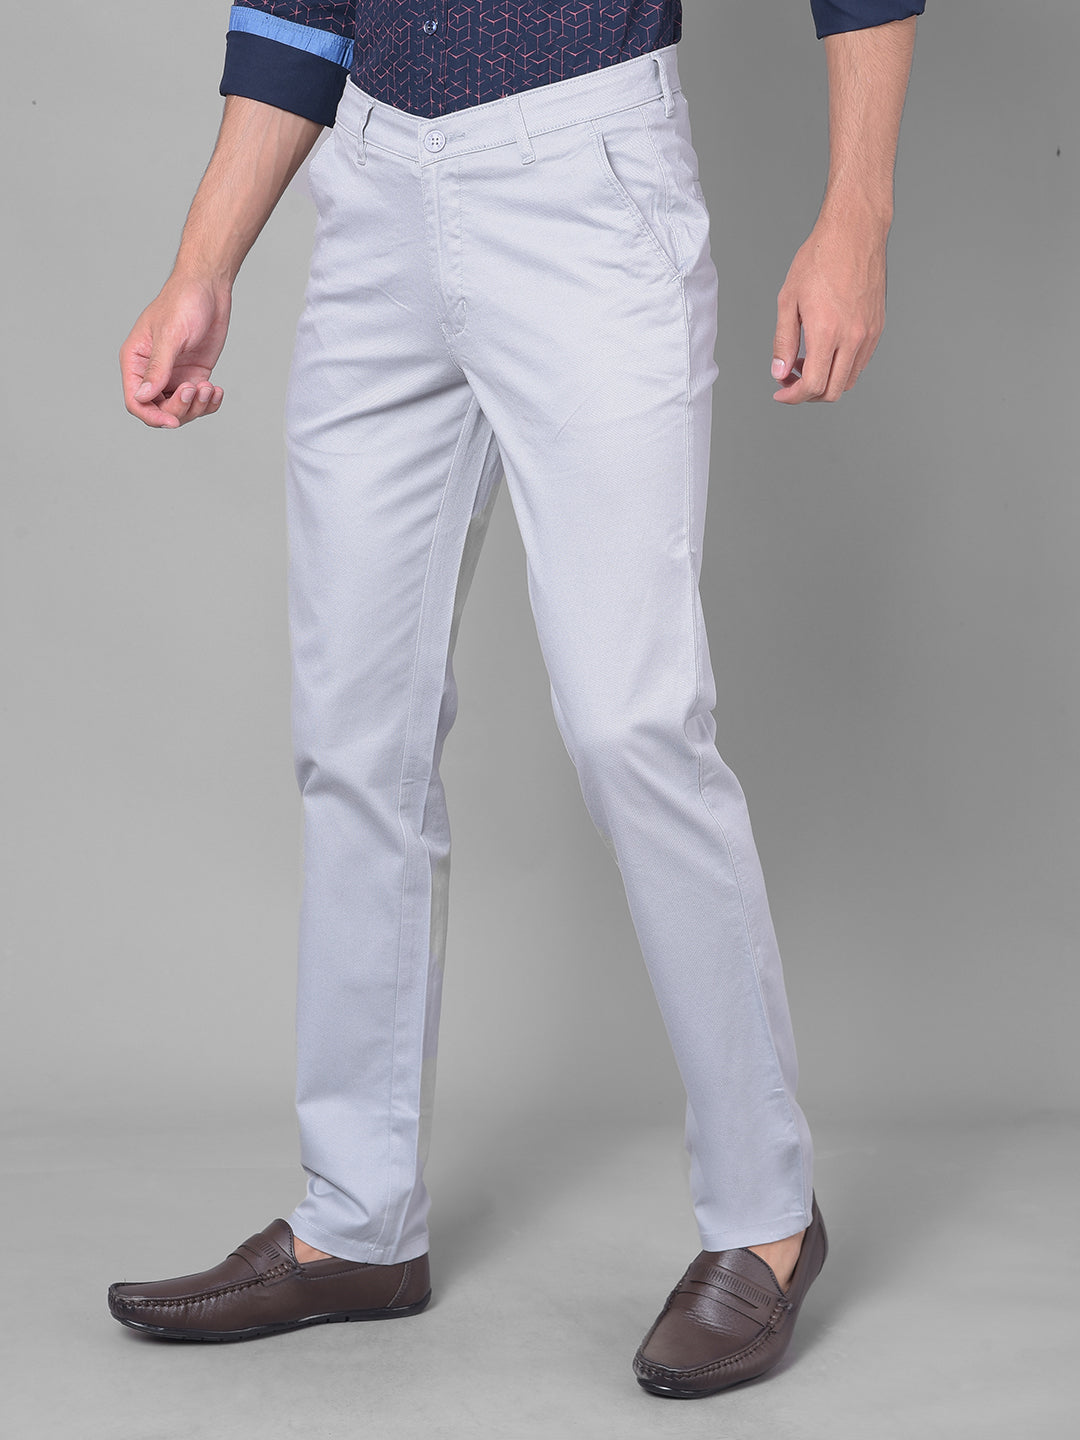 Narrow Bottom Trousers  Buy Narrow Bottom Trousers online in India